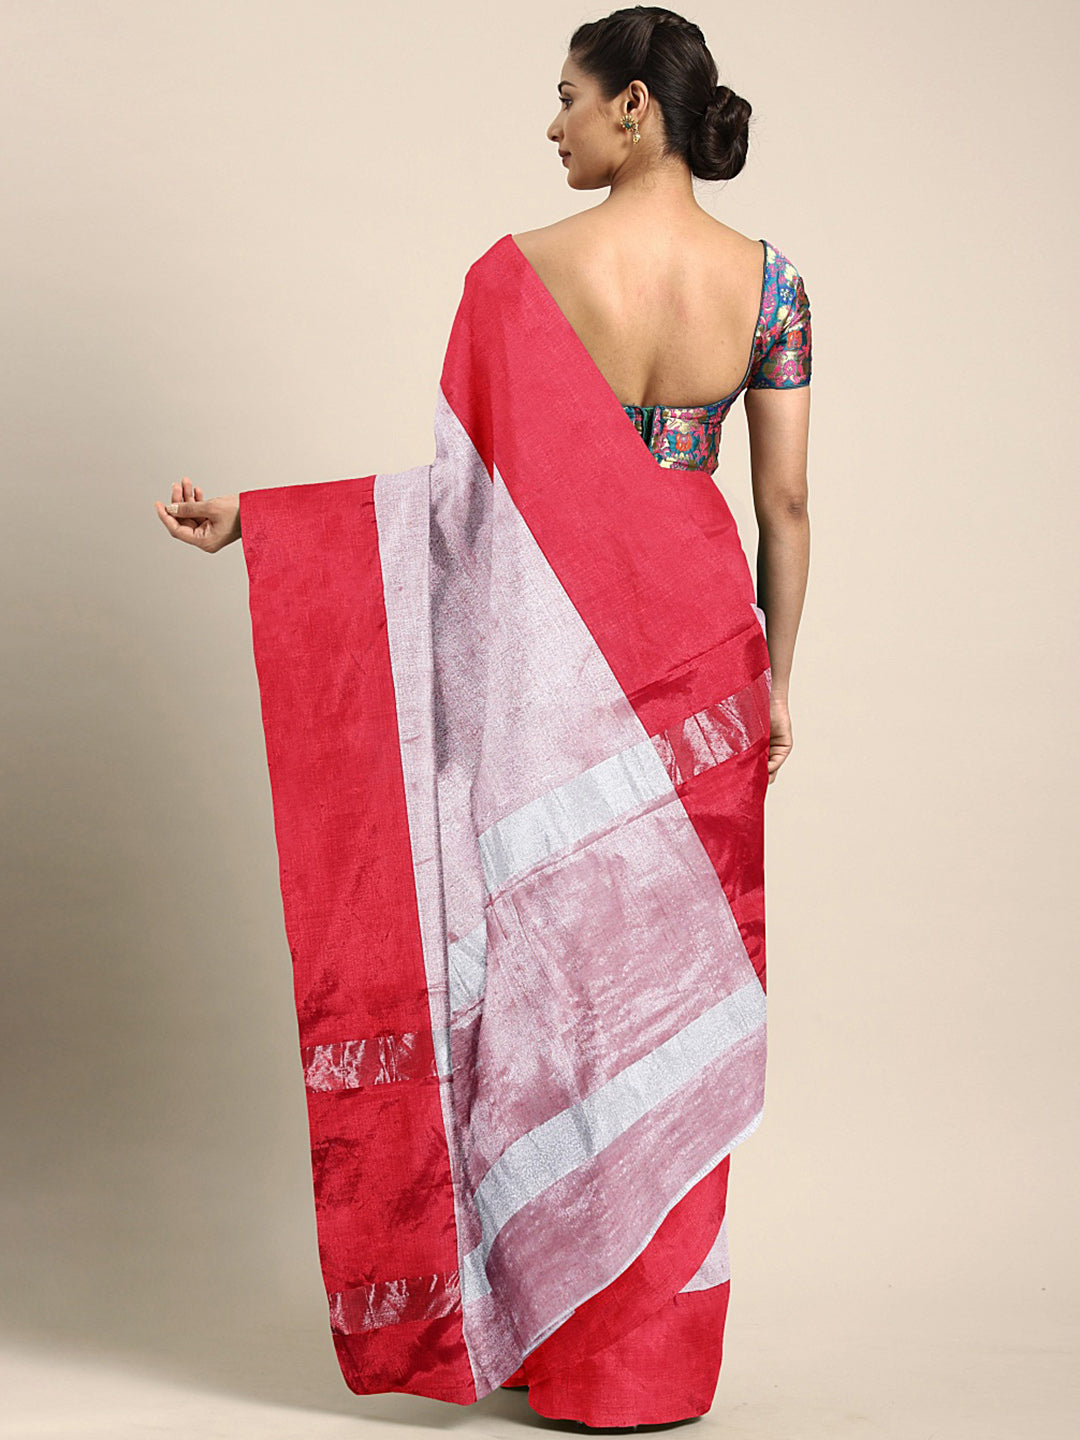 Kalakari India Upppada Silk Woven Saree With Blouse SKHSSA0007-Saree-Kalakari India-SKHSSA0007-Bollywood, Geographical Indication, Hand Crafted, Heritage Prints, Natural Dyes, Sarees, South Silk, Sustainable Fabrics, Uppada Silk, Woven-[Linen,Ethnic,wear,Fashionista,Handloom,Handicraft,Indigo,blockprint,block,print,Cotton,Chanderi,Blue, latest,classy,party,bollywood,trendy,summer,style,traditional,formal,elegant,unique,style,hand,block,print, dabu,booti,gift,present,glamorous,affordable,collecti